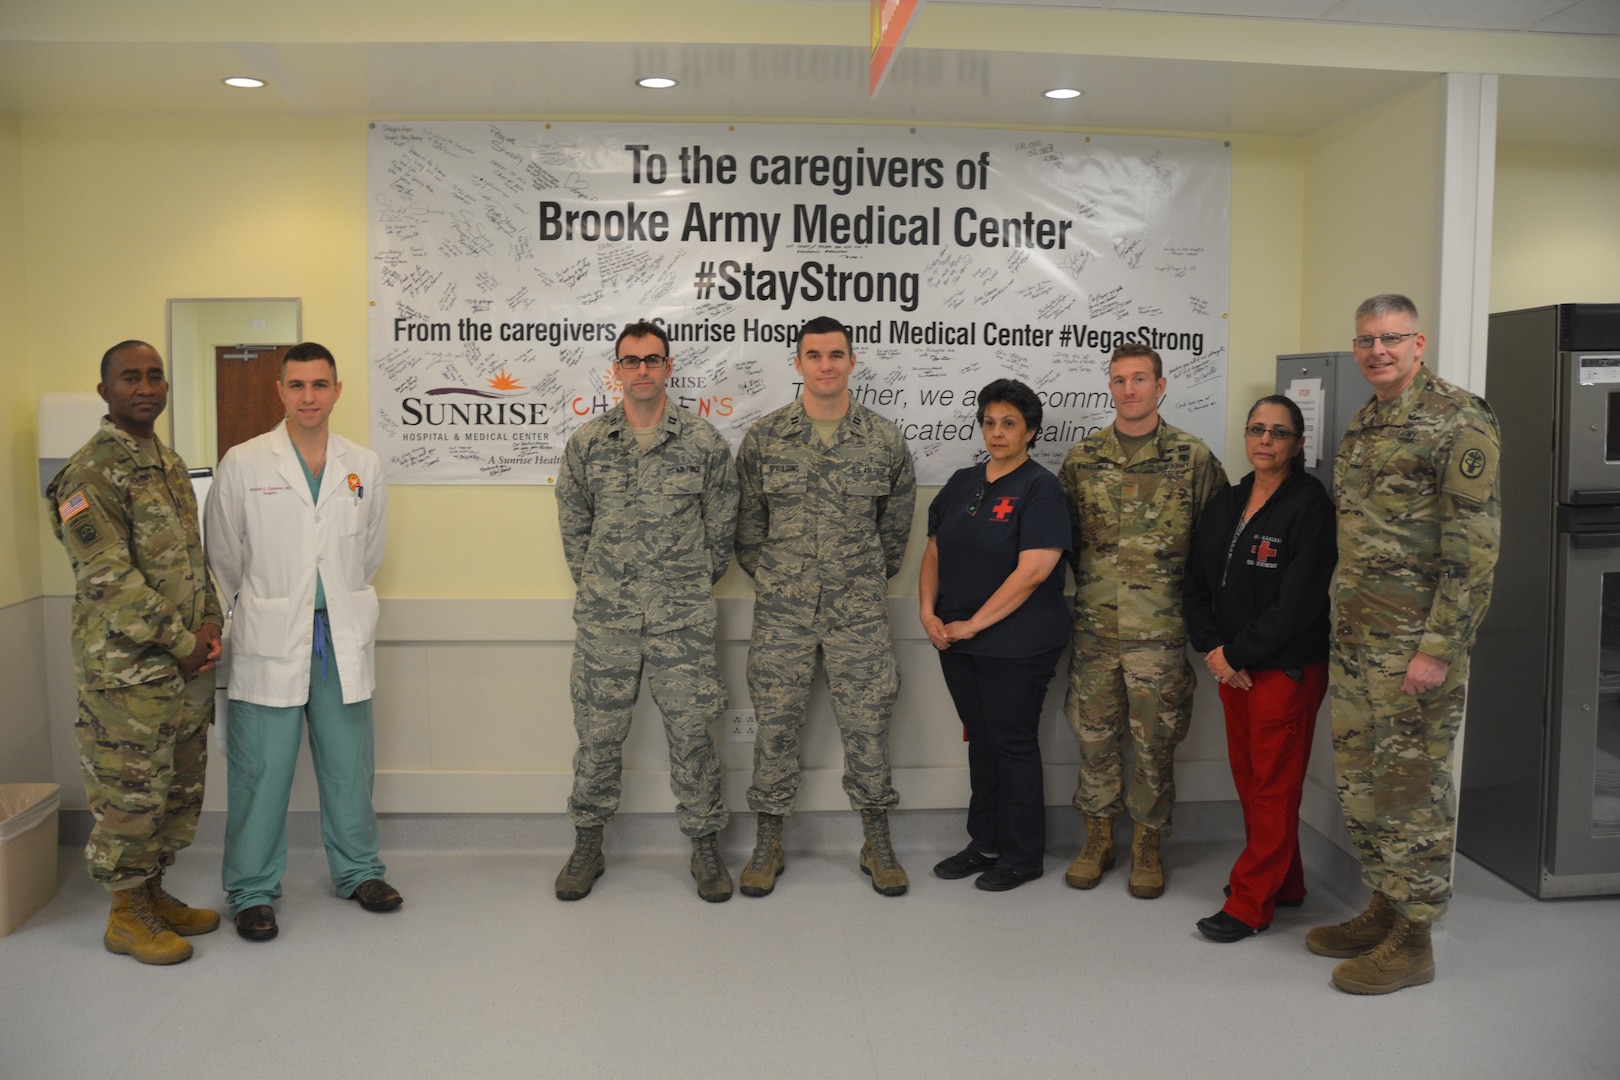 Brooke Army Medical Center Commanding General Brig. Gen. Jeffrey Johnson (far right), Command Sgt. Maj. Diamond Hough (far left) and Emergency Department personnel pose in front of a #StayStrong banner in the ED.
Sunrise Hospital and Medical Center sent the banner as a show of support to BAMC after the Sutherland Springs shooting Nov. 5, 2017. Sunrise Hospital treated more than 200 injured in the Las Vegas shooting last October. BAMC, which treated eight victims from Sutherland Springs, plans to rotate the banner throughout the hospital in the coming months to share the banner, which is filled with well-wishes and messages of hope and support.